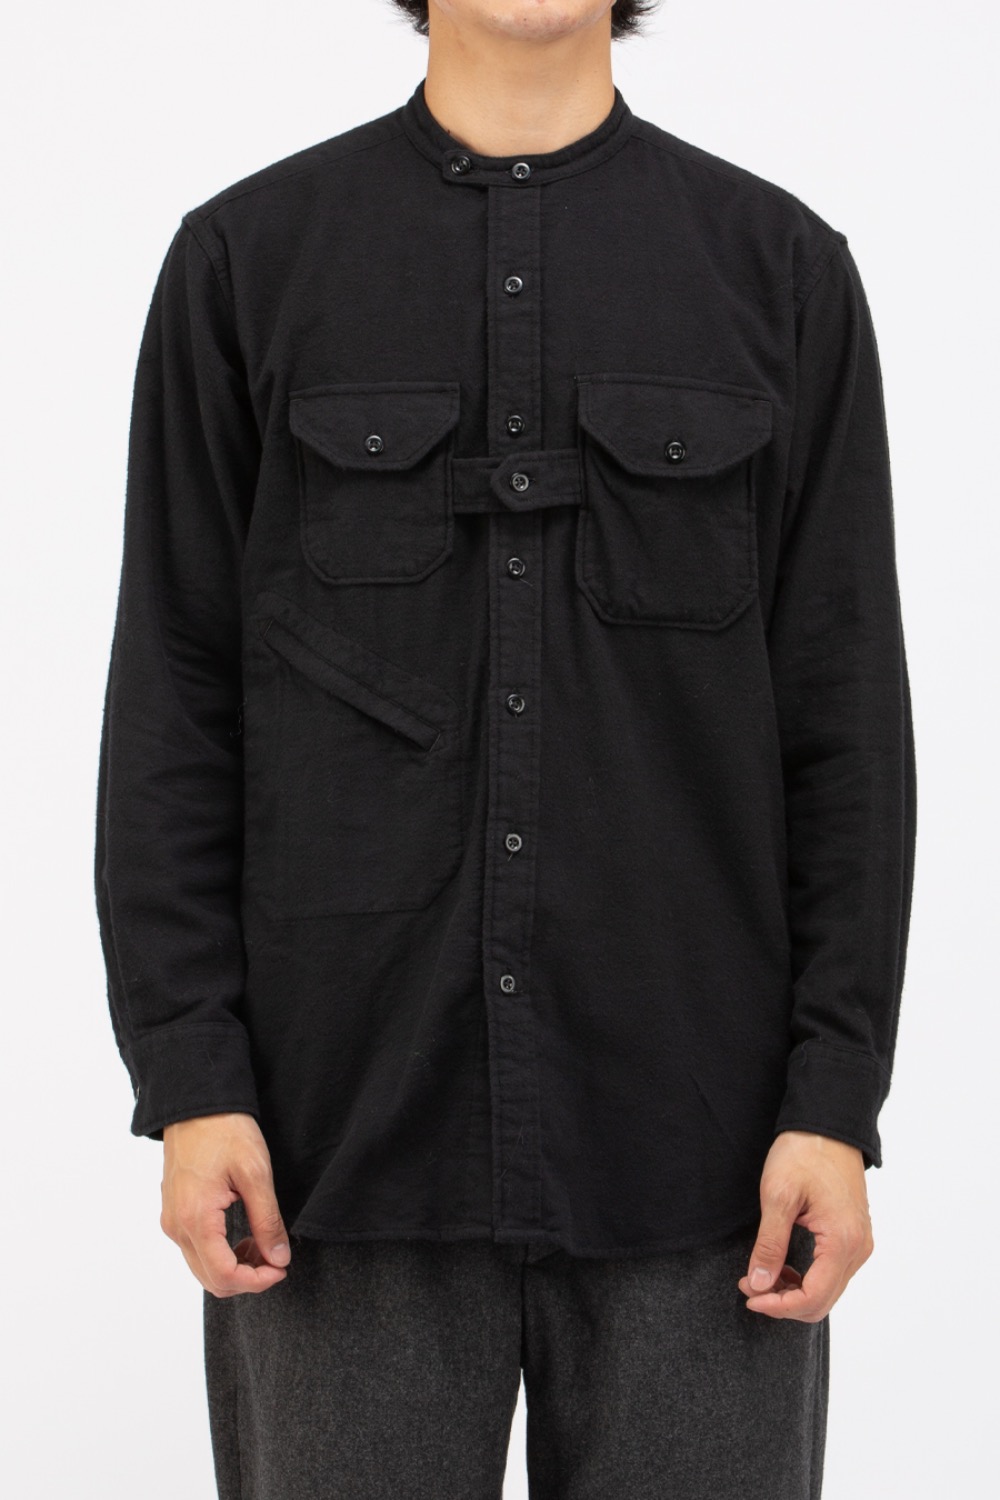 BANDED COLLAR SHIRT BLACK SOLID COTTON FLANNEL